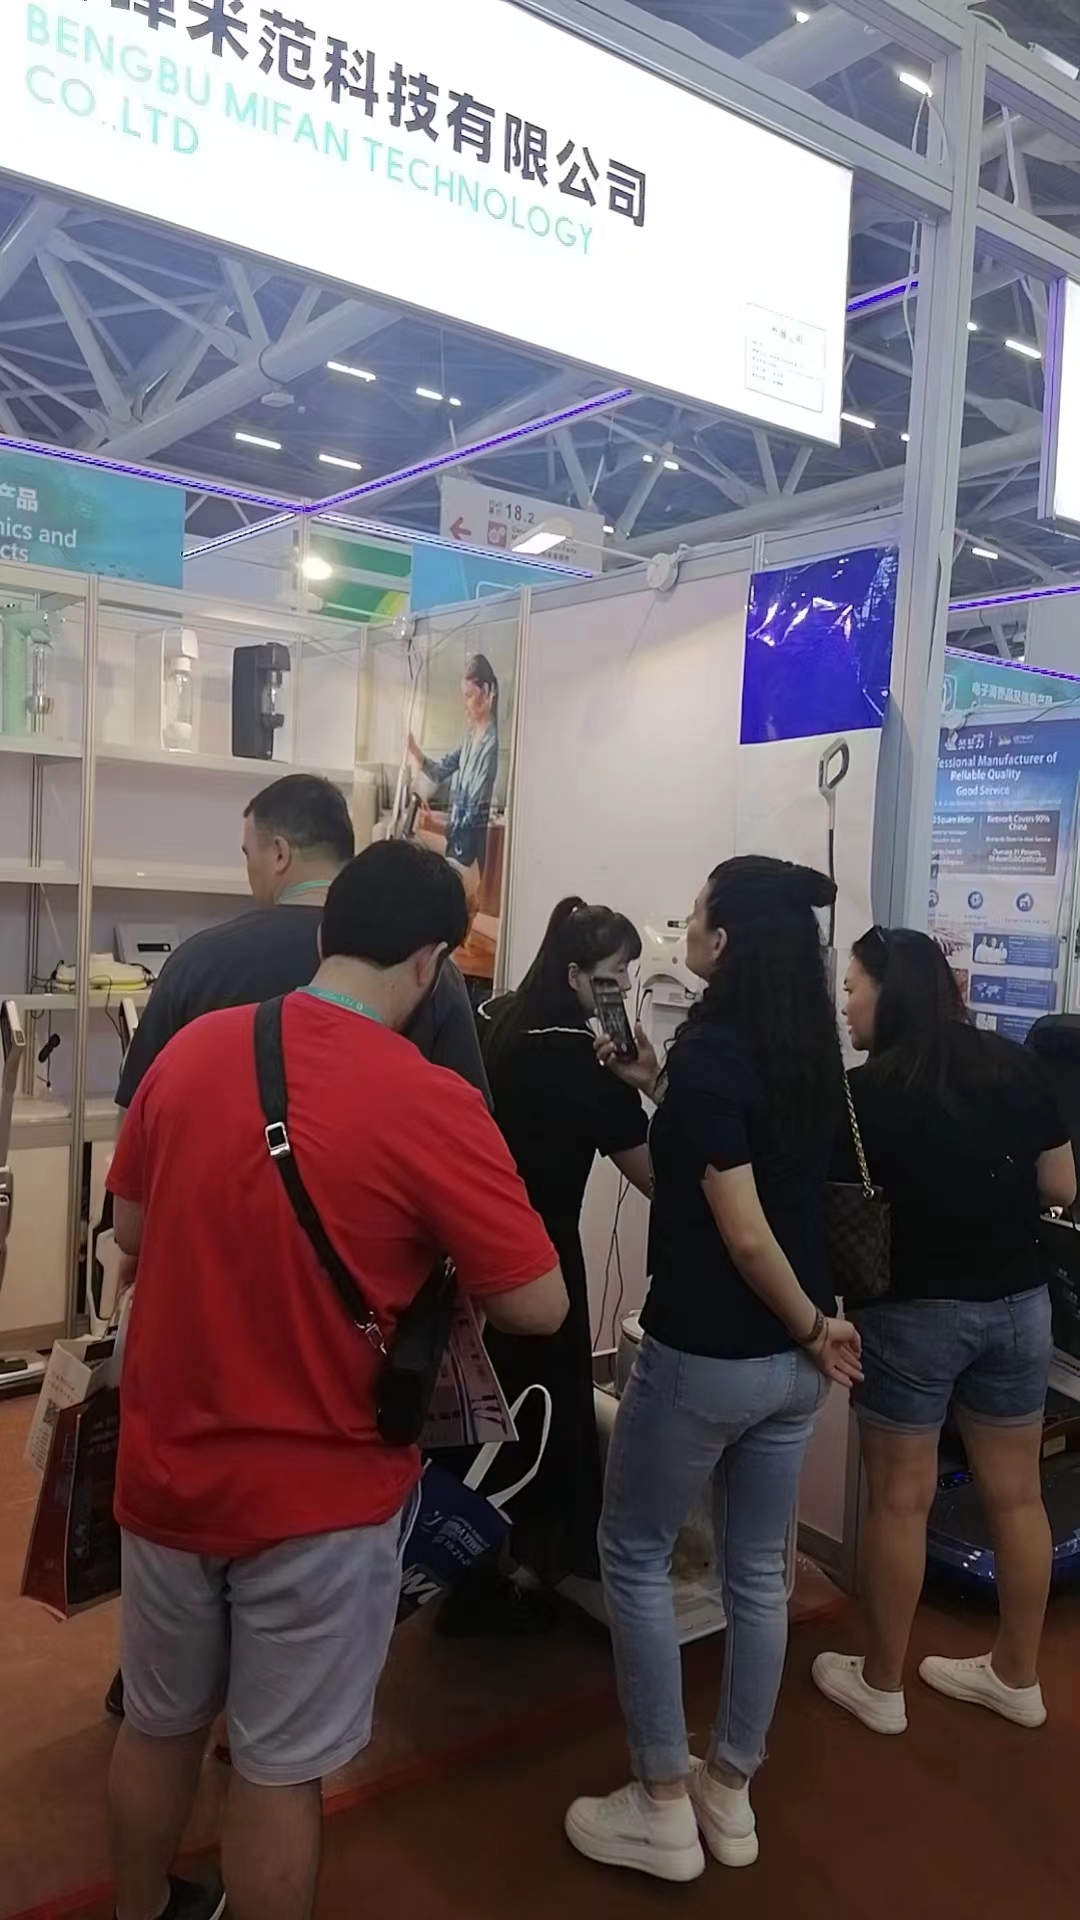 Bengbu MiFan Technology Co., Ltd to Showcase Innovative Wet-Dry Vacuum Cleaners, and Window Robot Cleaners at the 133rd Canton Fair in Guangzhou, China. - Company News - 1